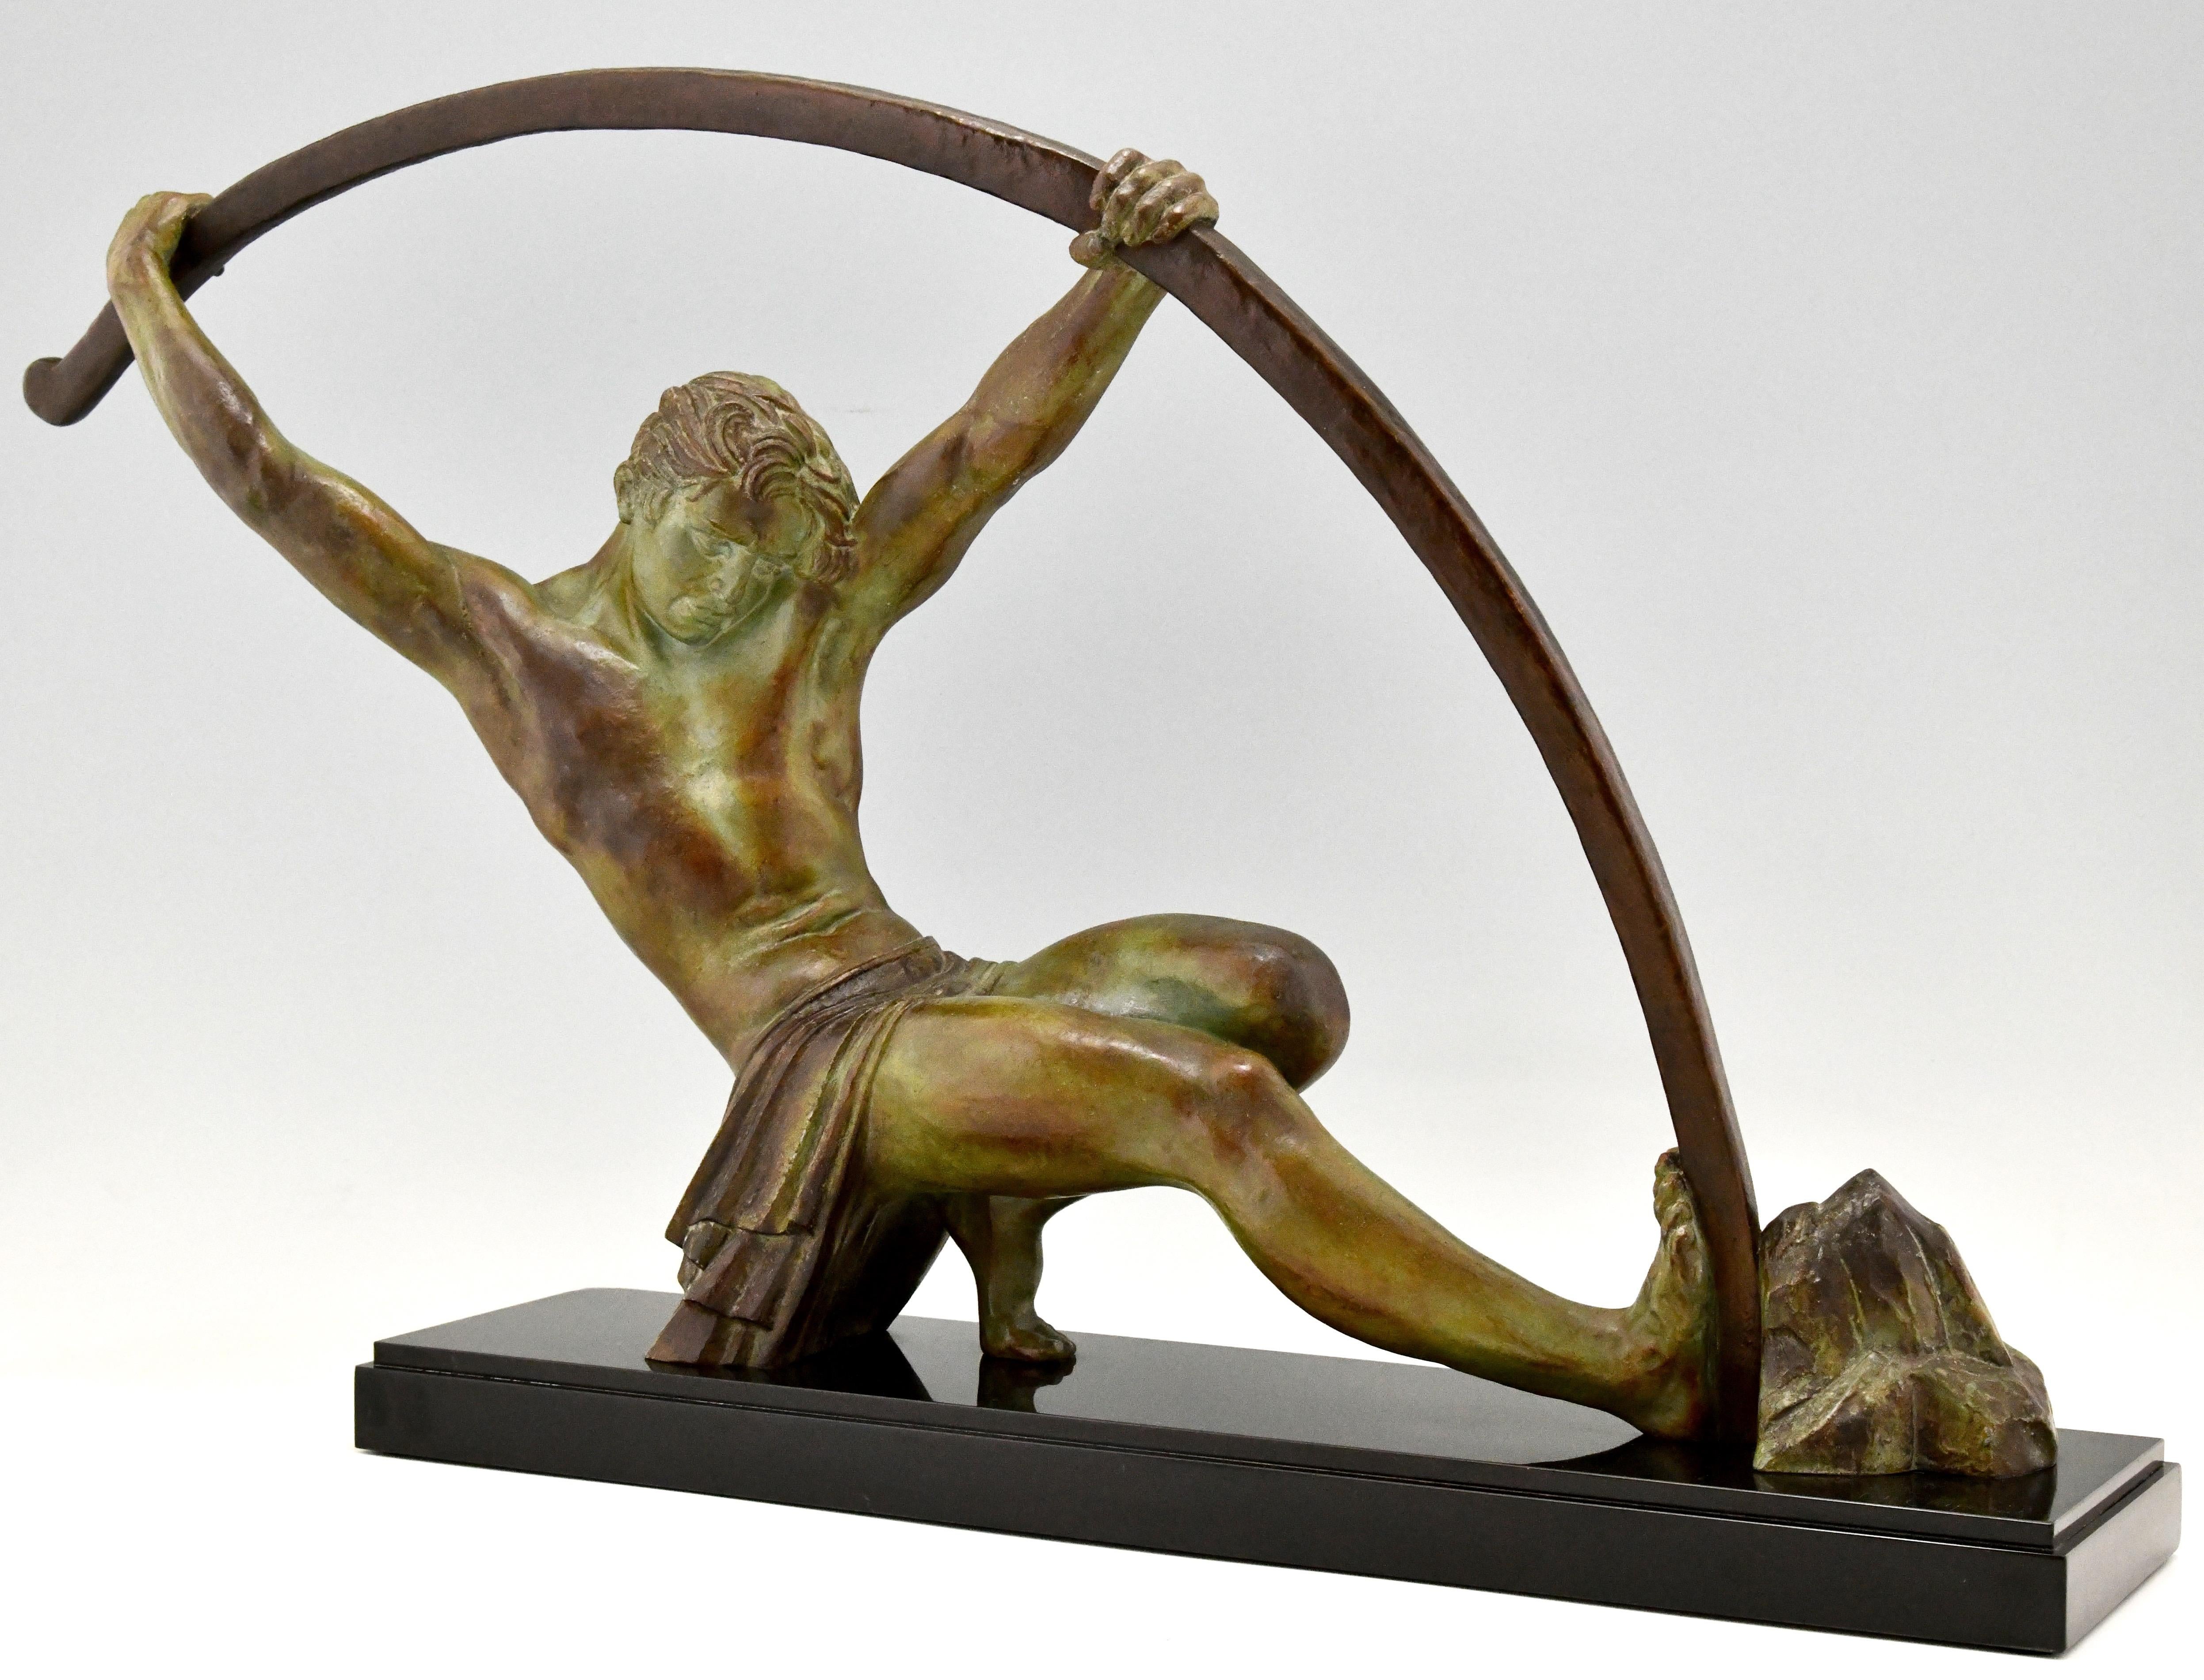 Impressive Art Deco sculpture of an athletic man bending a bar.
This work is titled 